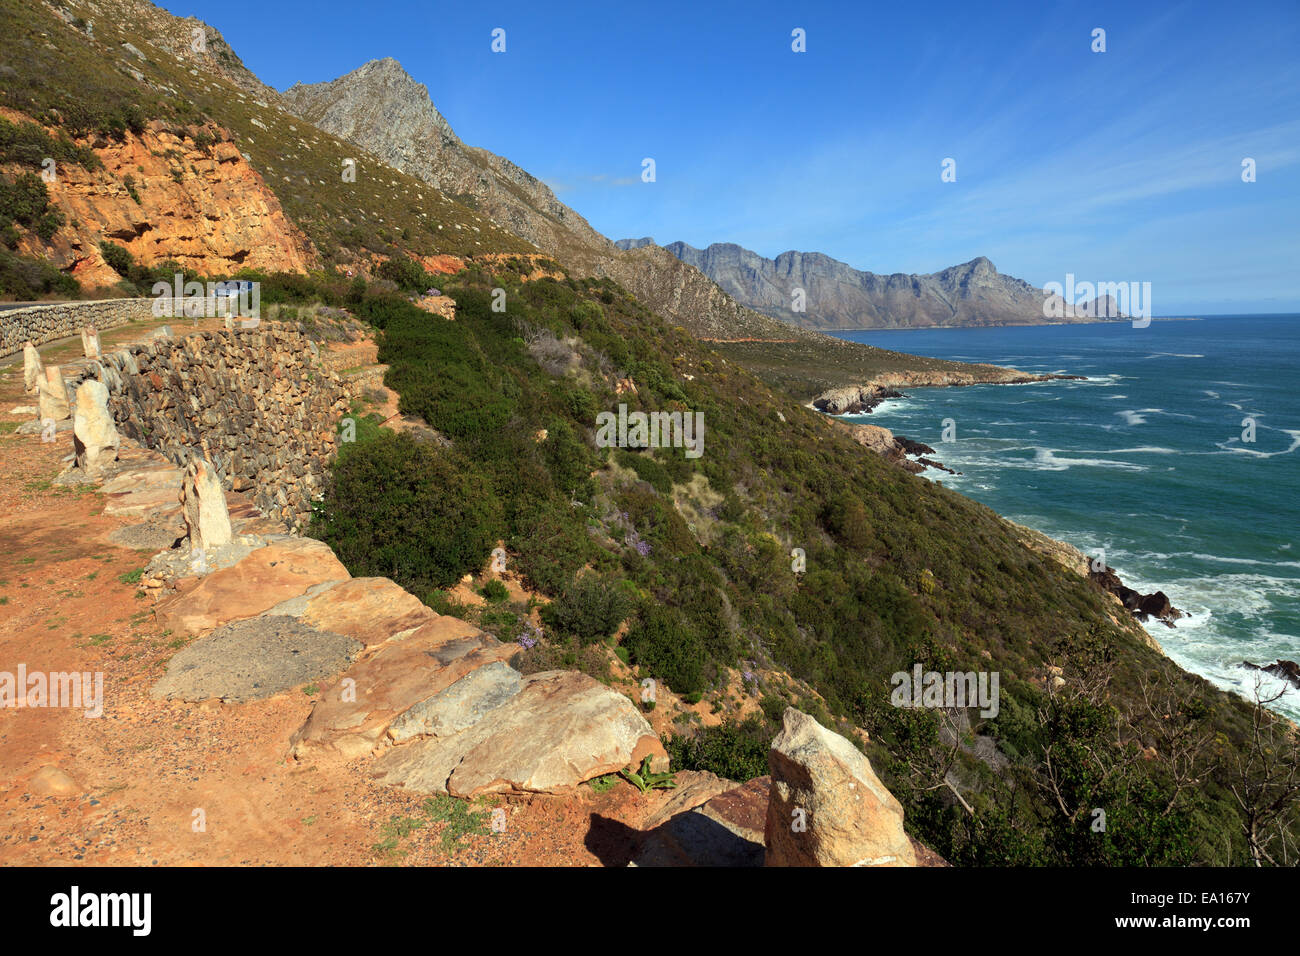 Coast of South Africa Stock Photo